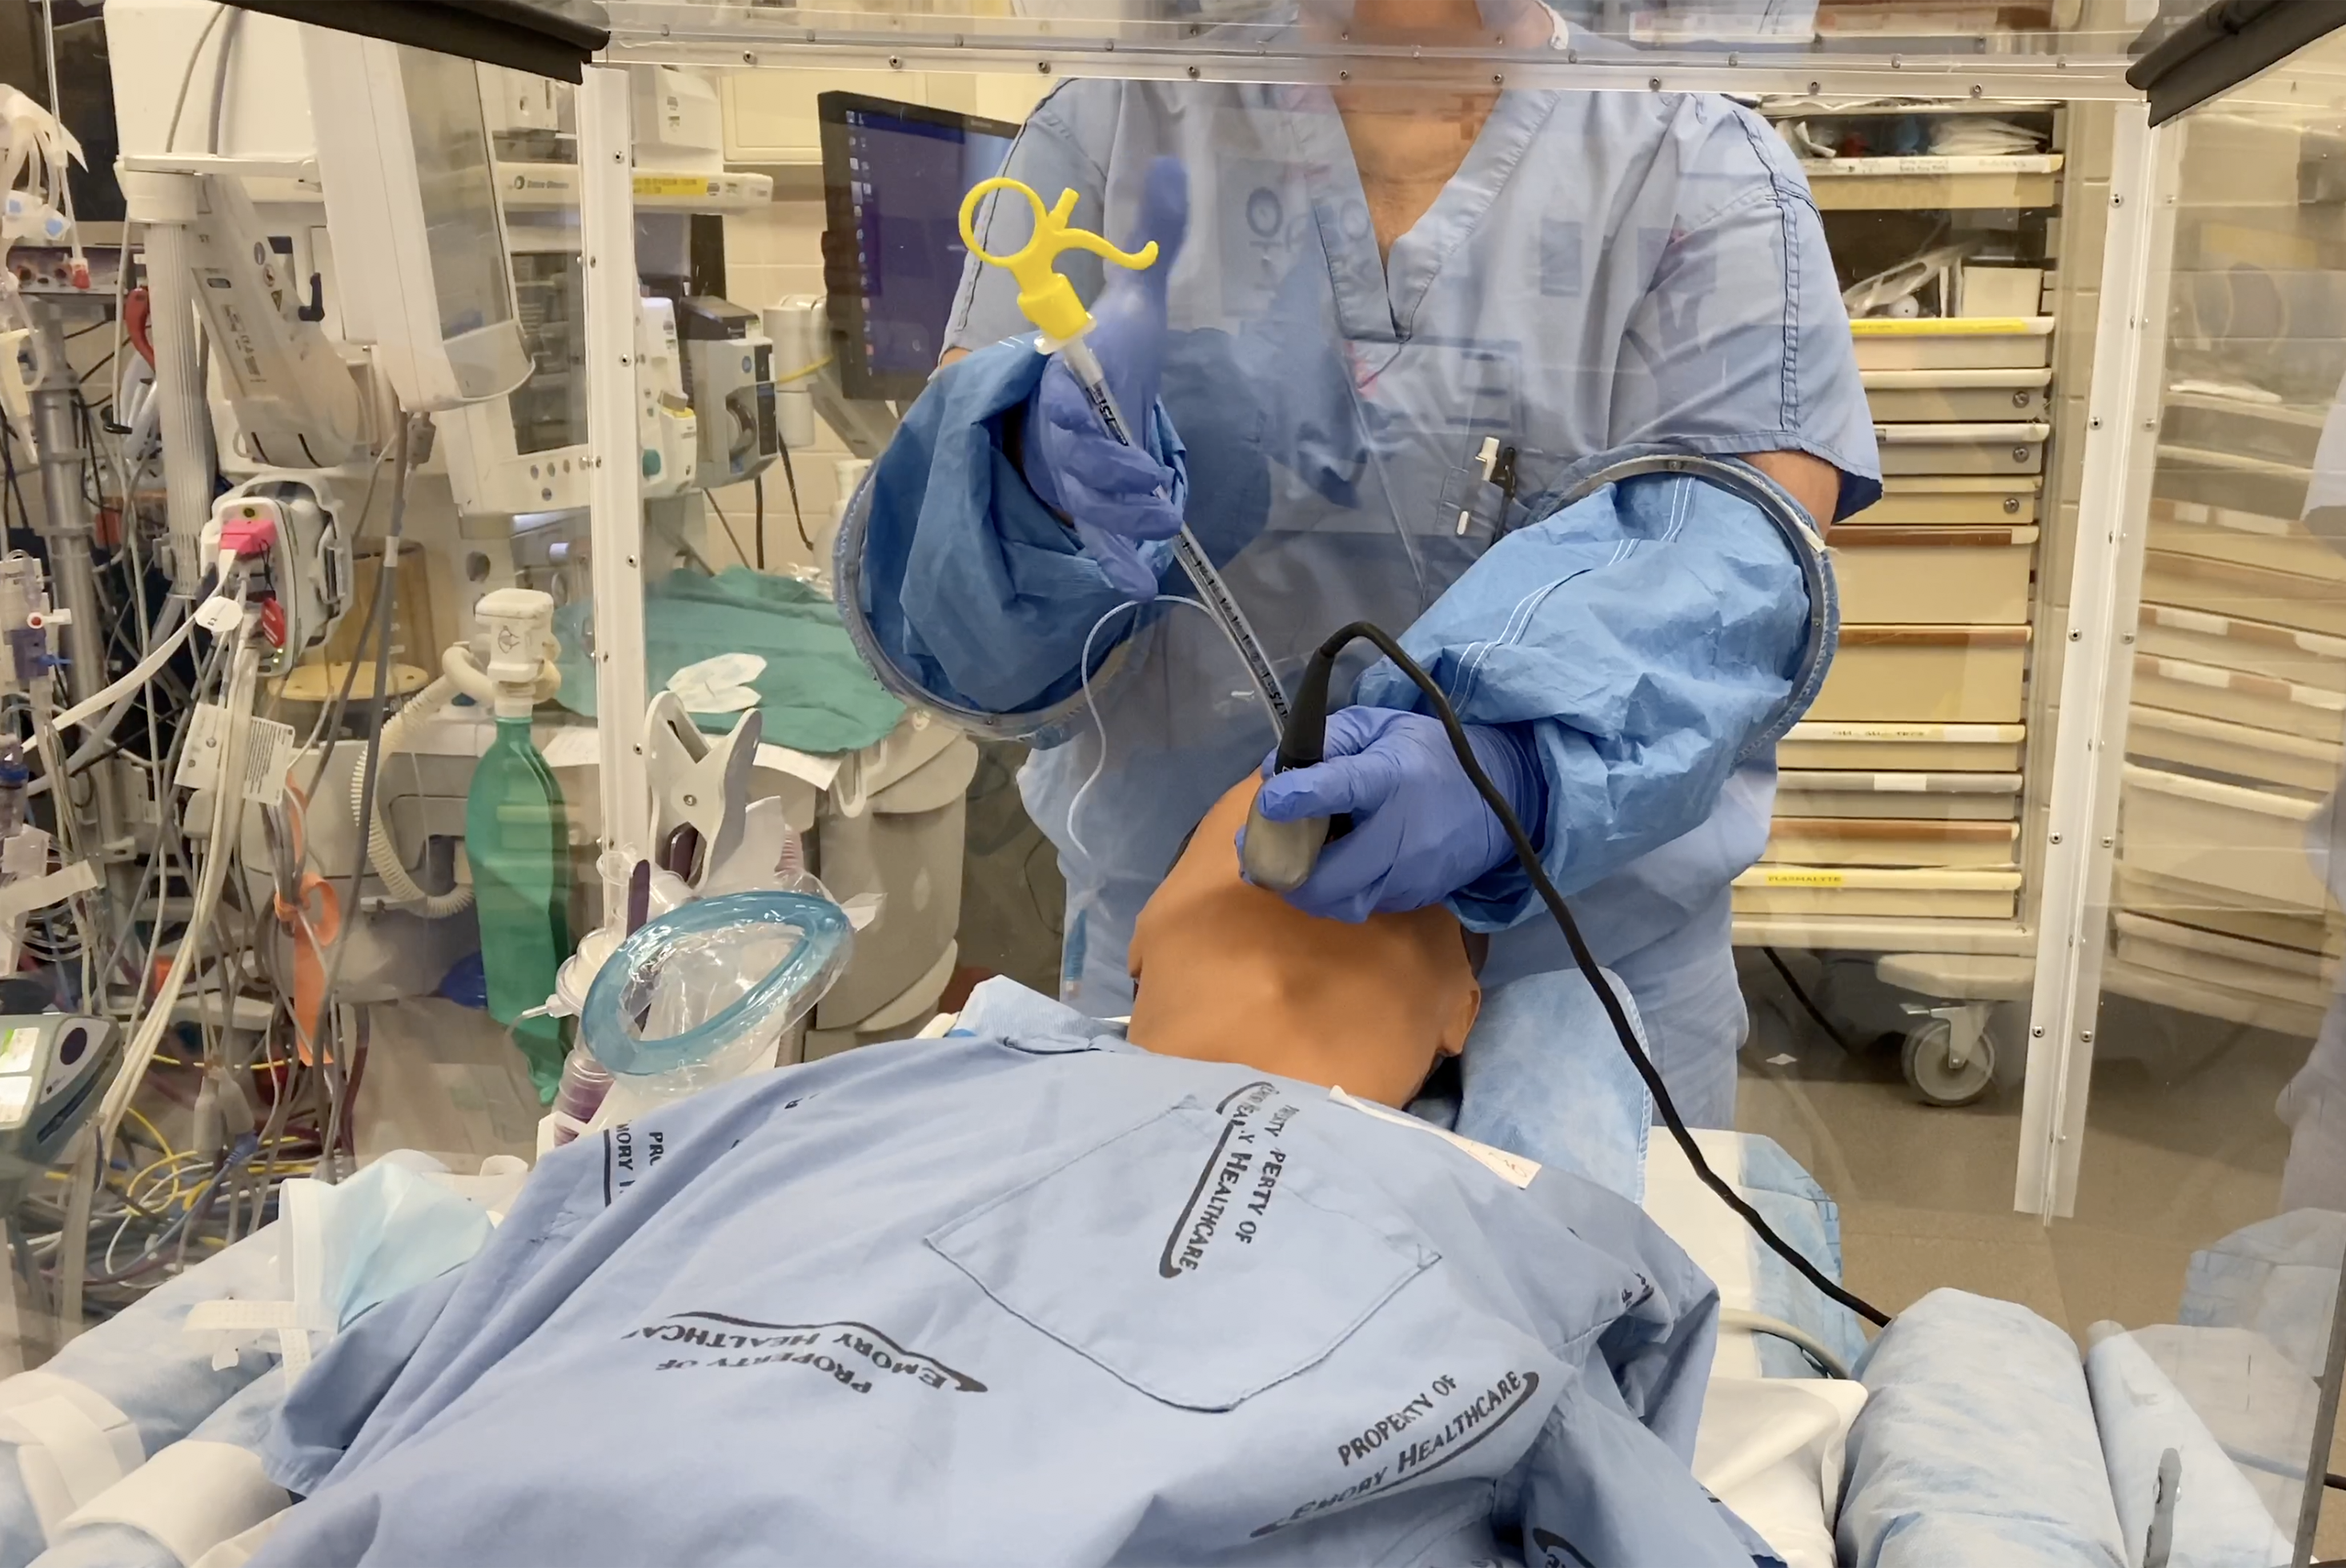 A clinician demonstrates how a barrier protection device allows procedures to be done while providing protection against aerosols from a COVID-19 patient. (Credit: Emory Healthcare)